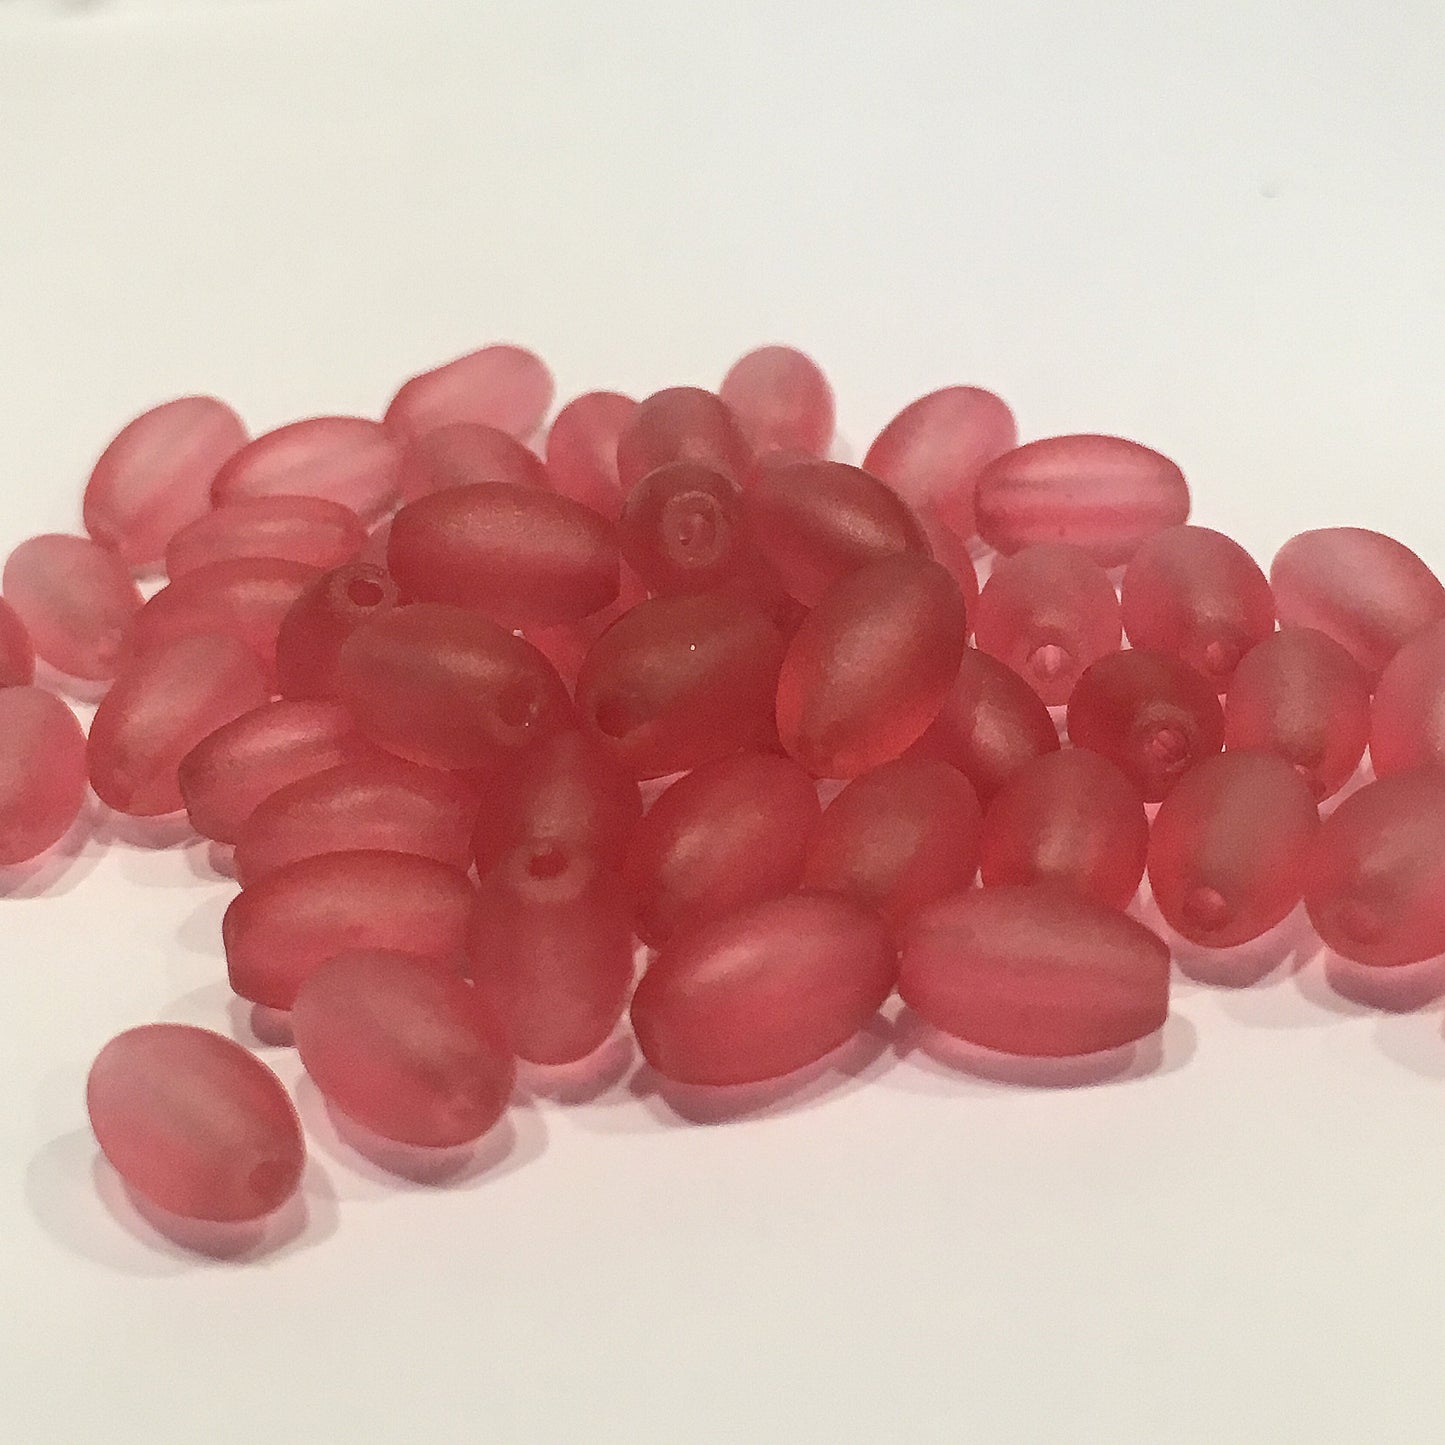 Translucent Pink Acrylic Oval Beads, 7 x 4 mm, 52 Beads